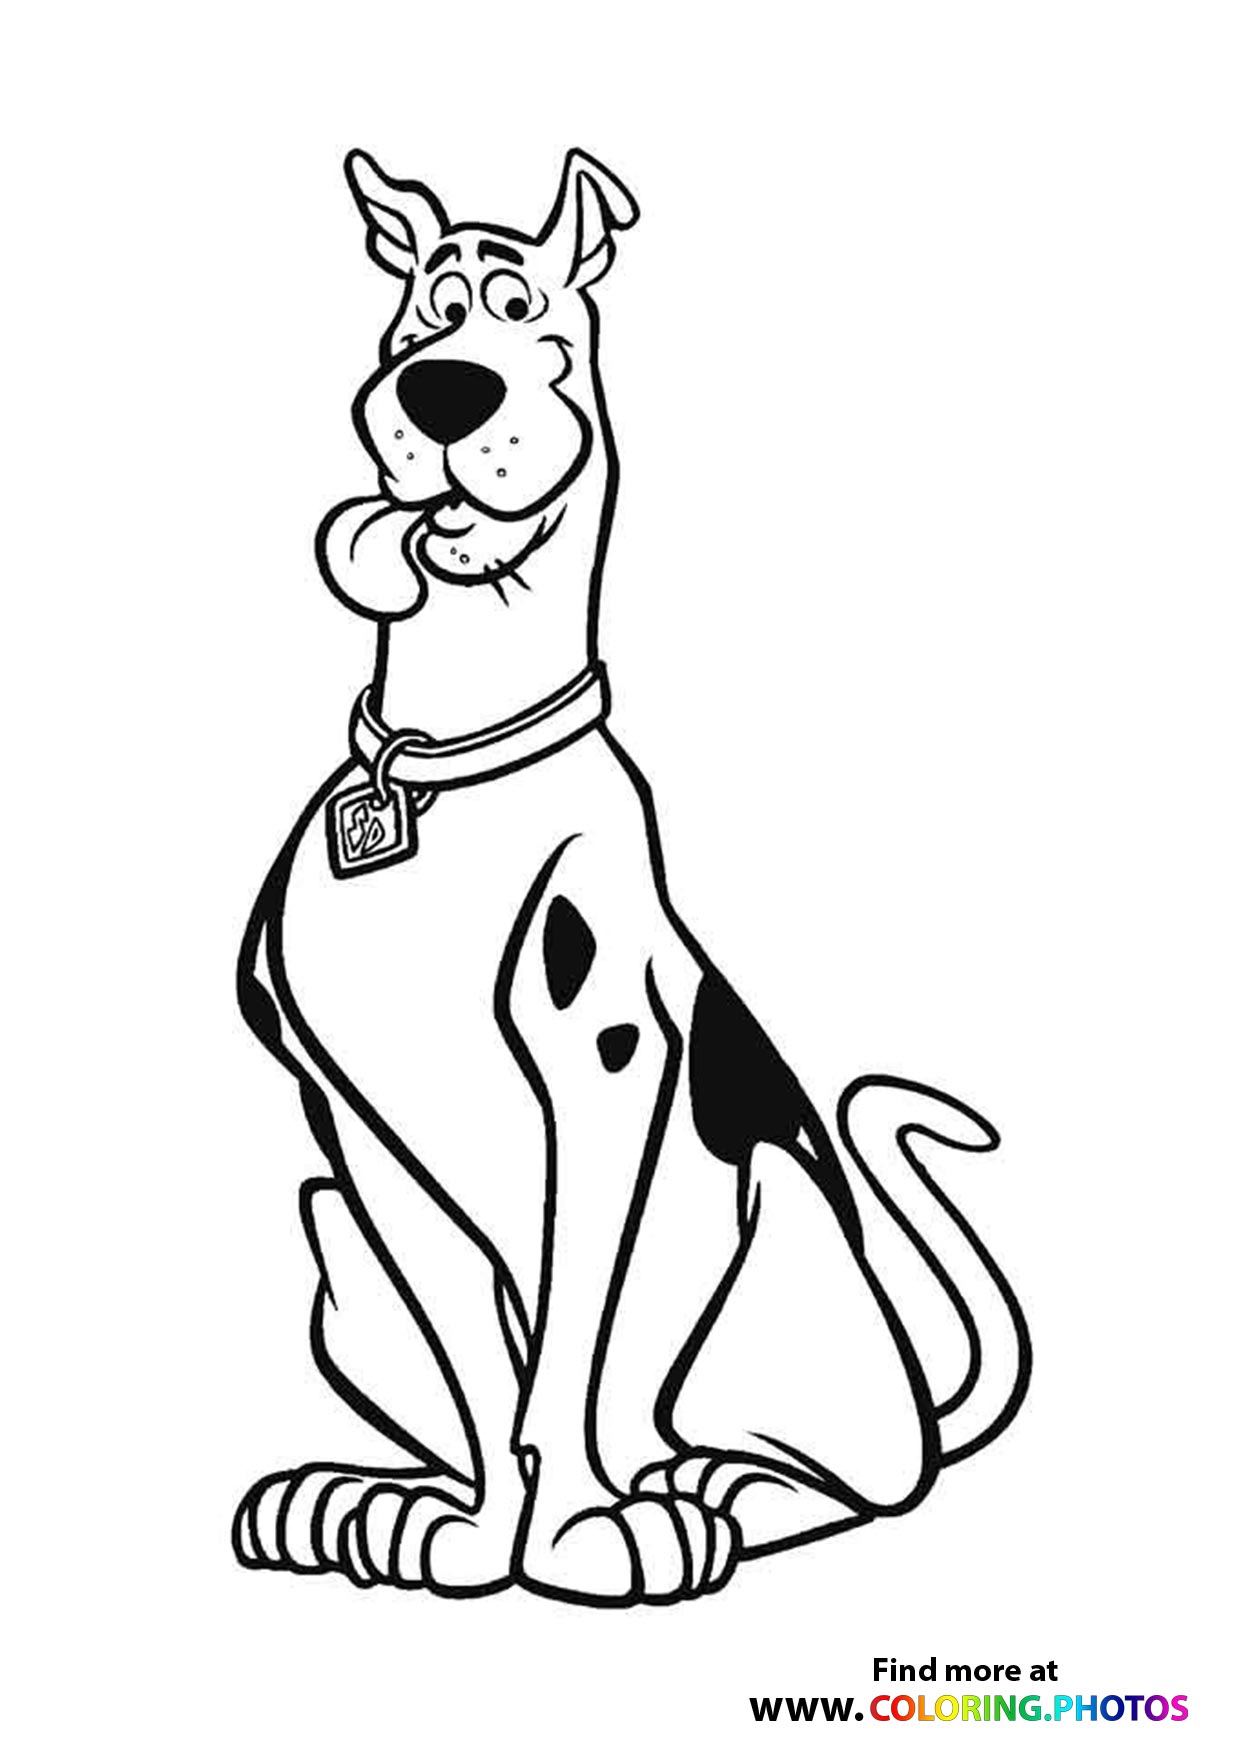 ScoobyDoo Coloring Pages for kids Easy and free print or download